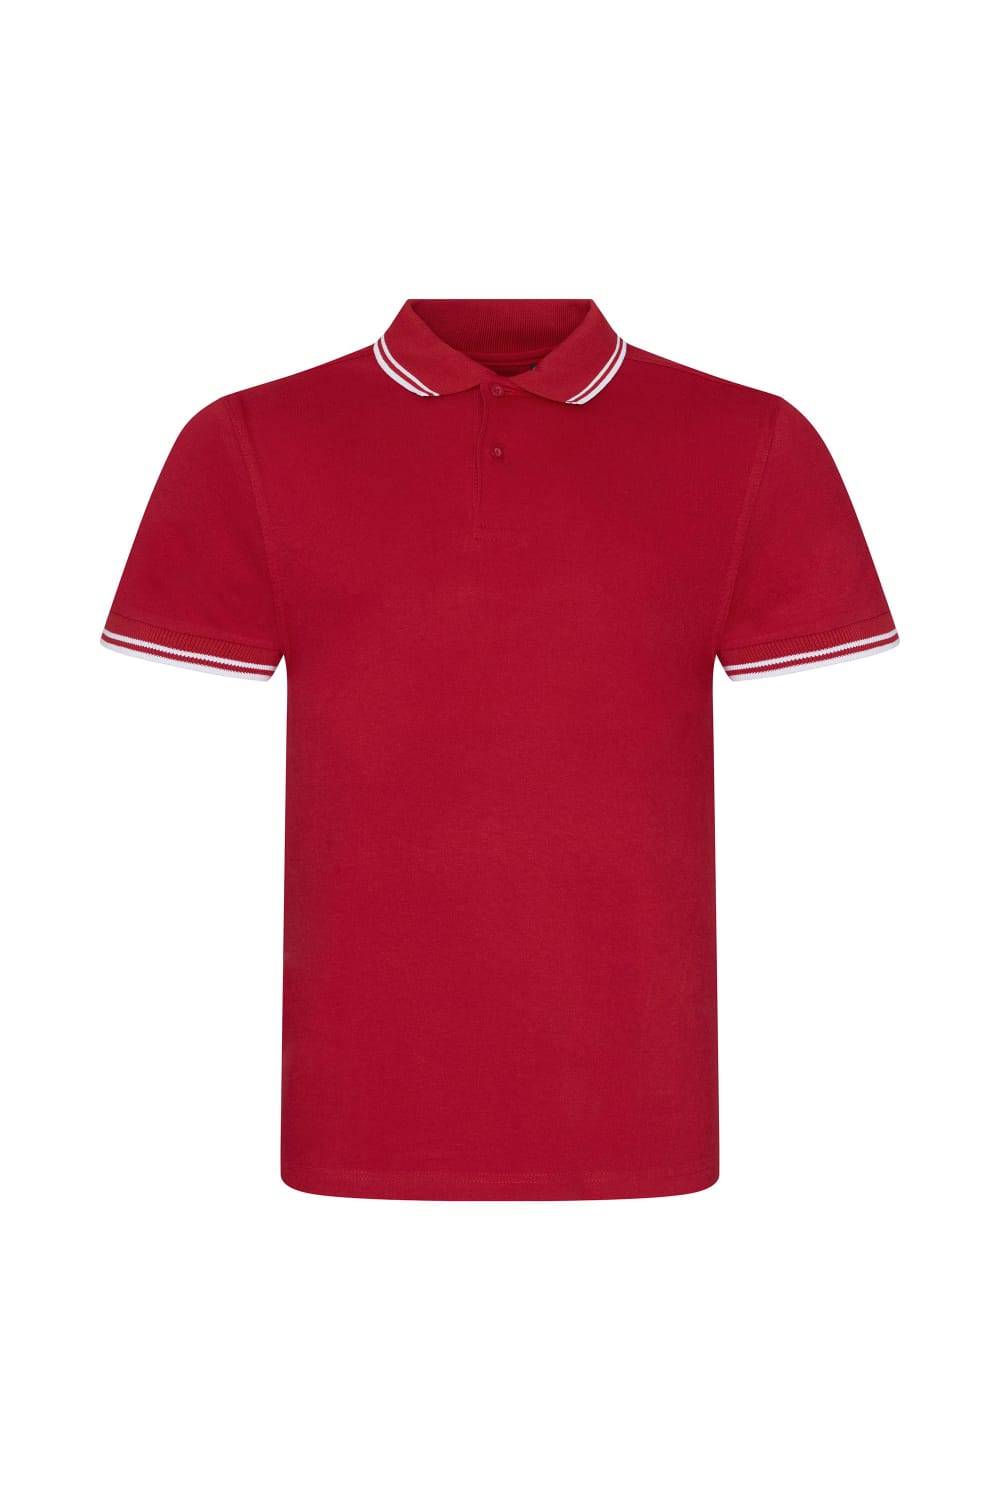 Mens Stretch Tipped Polo Shirt - Red/ White